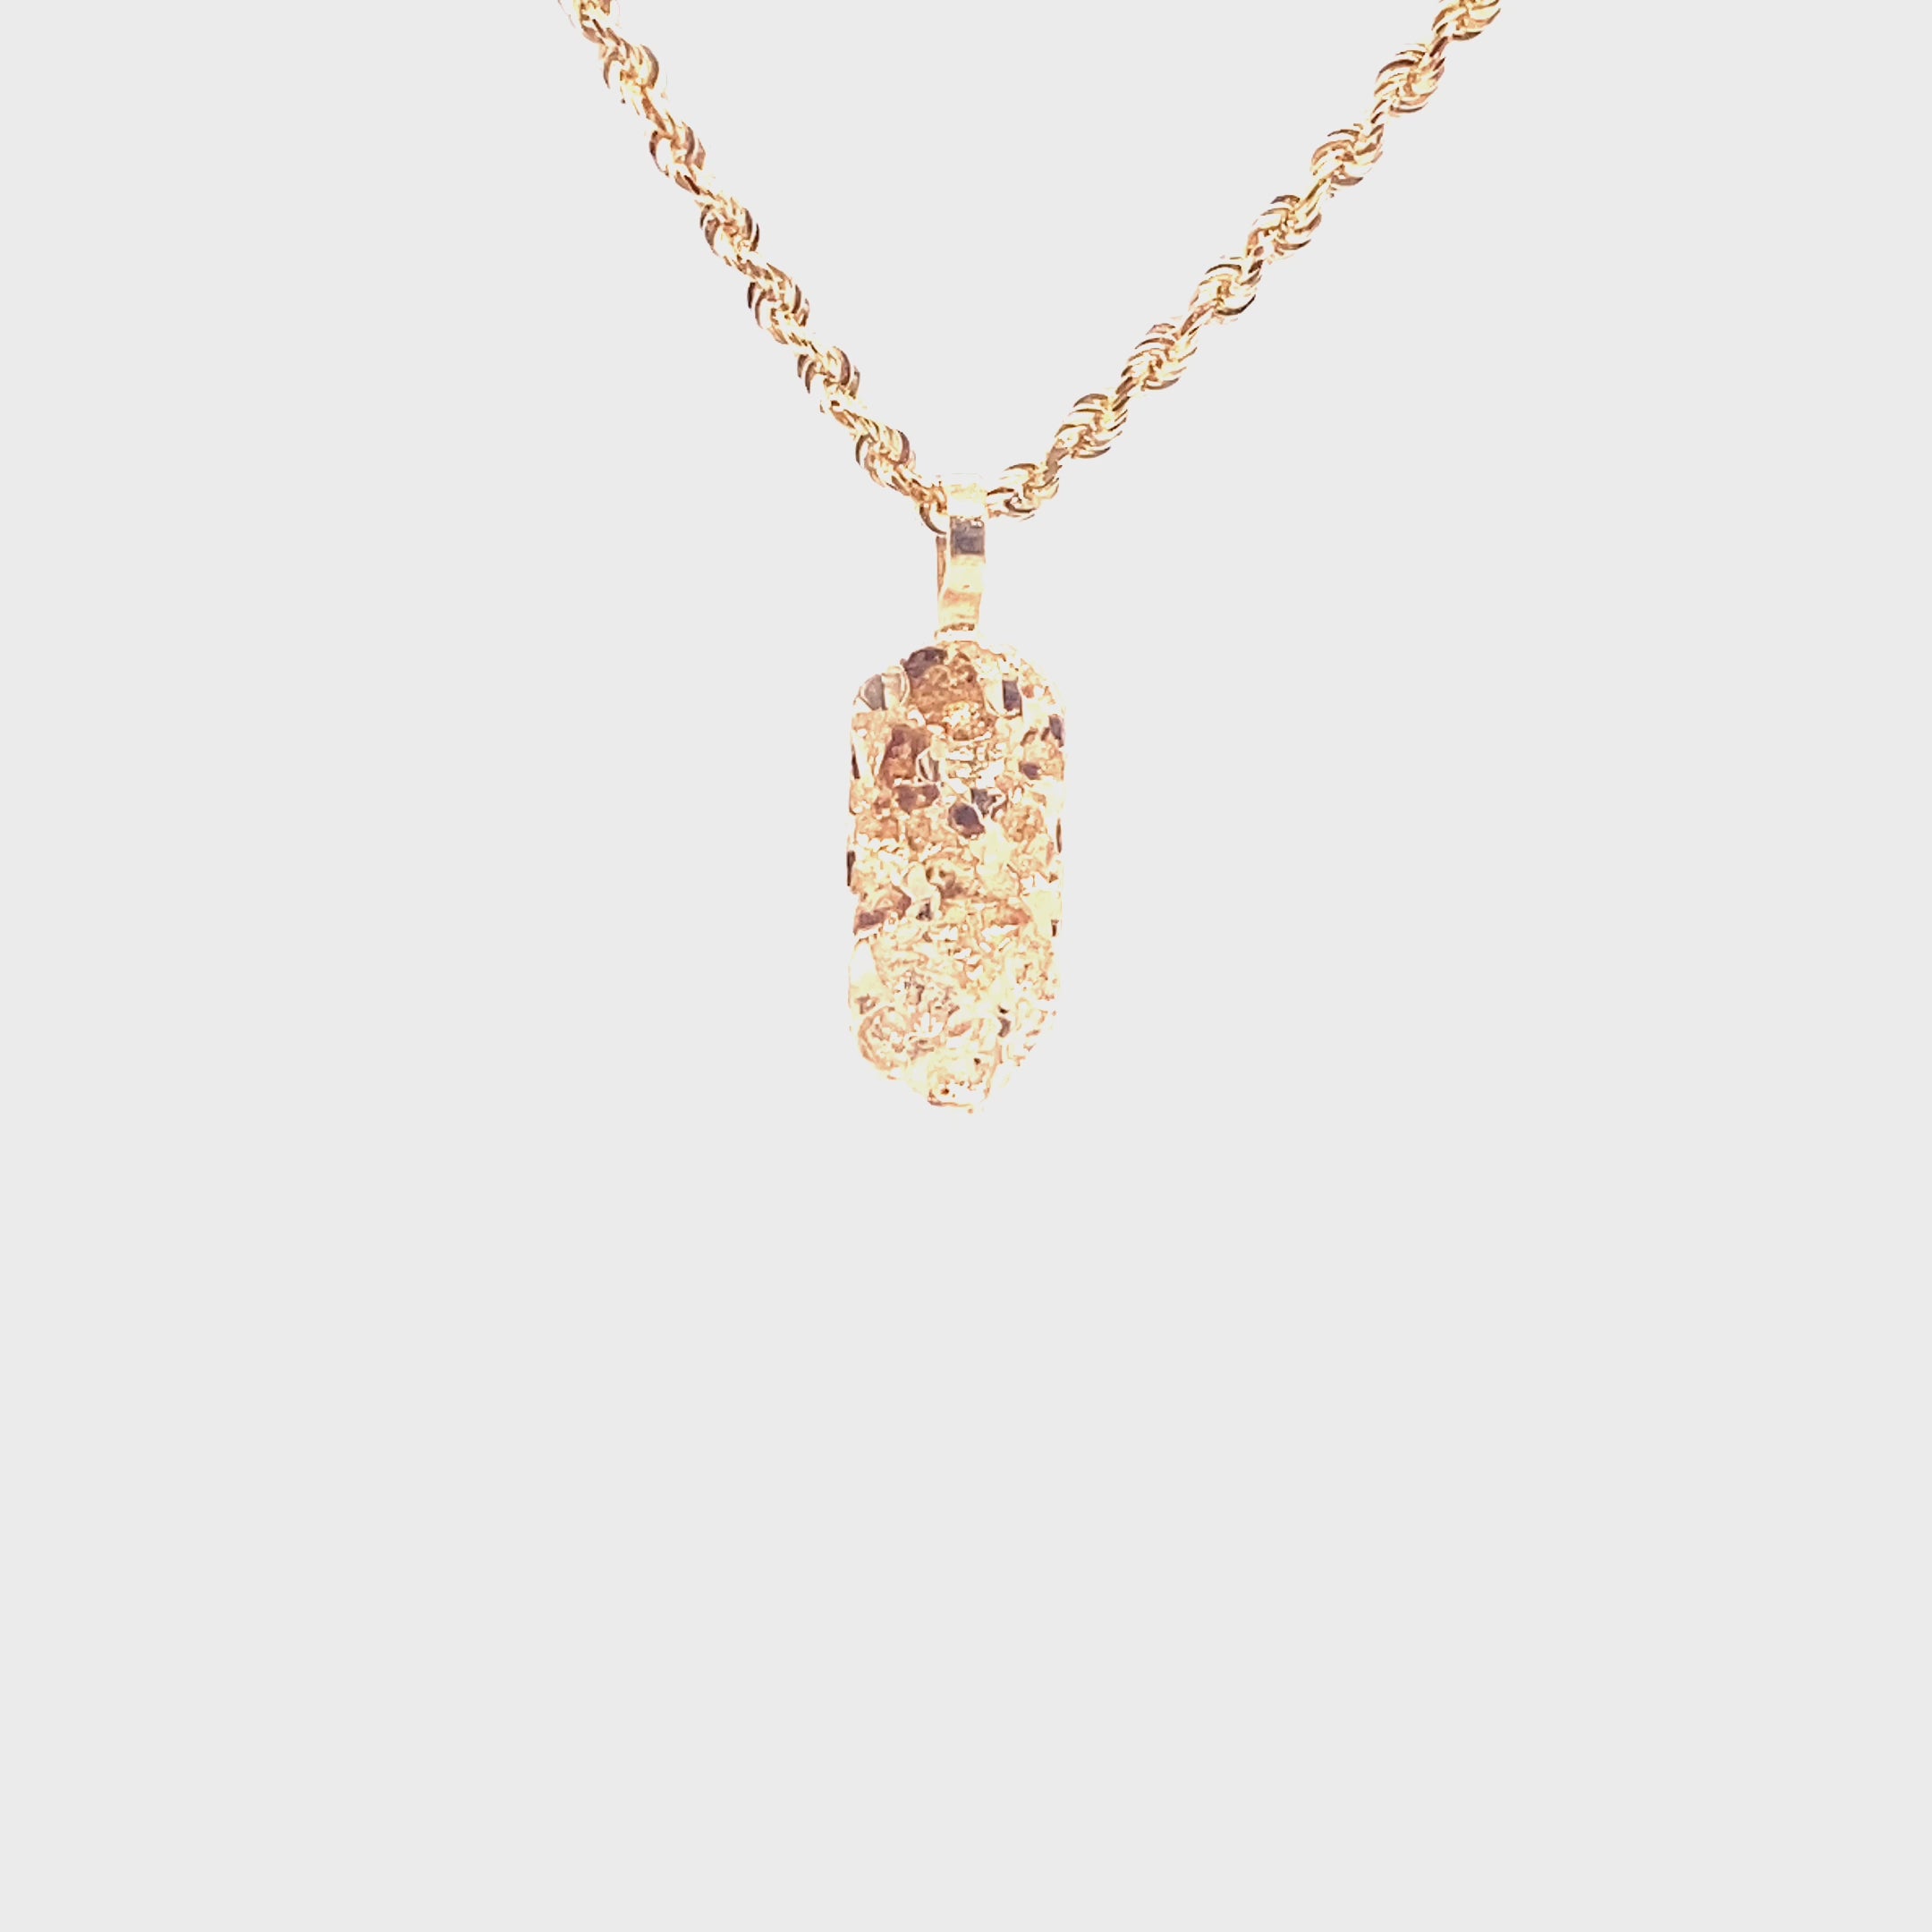 Classic Retro Carved Gold Nugget Pendant With Gold Plating And Zircon Inlay  For Men And Women From Makiyong, $9.94 | DHgate.Com